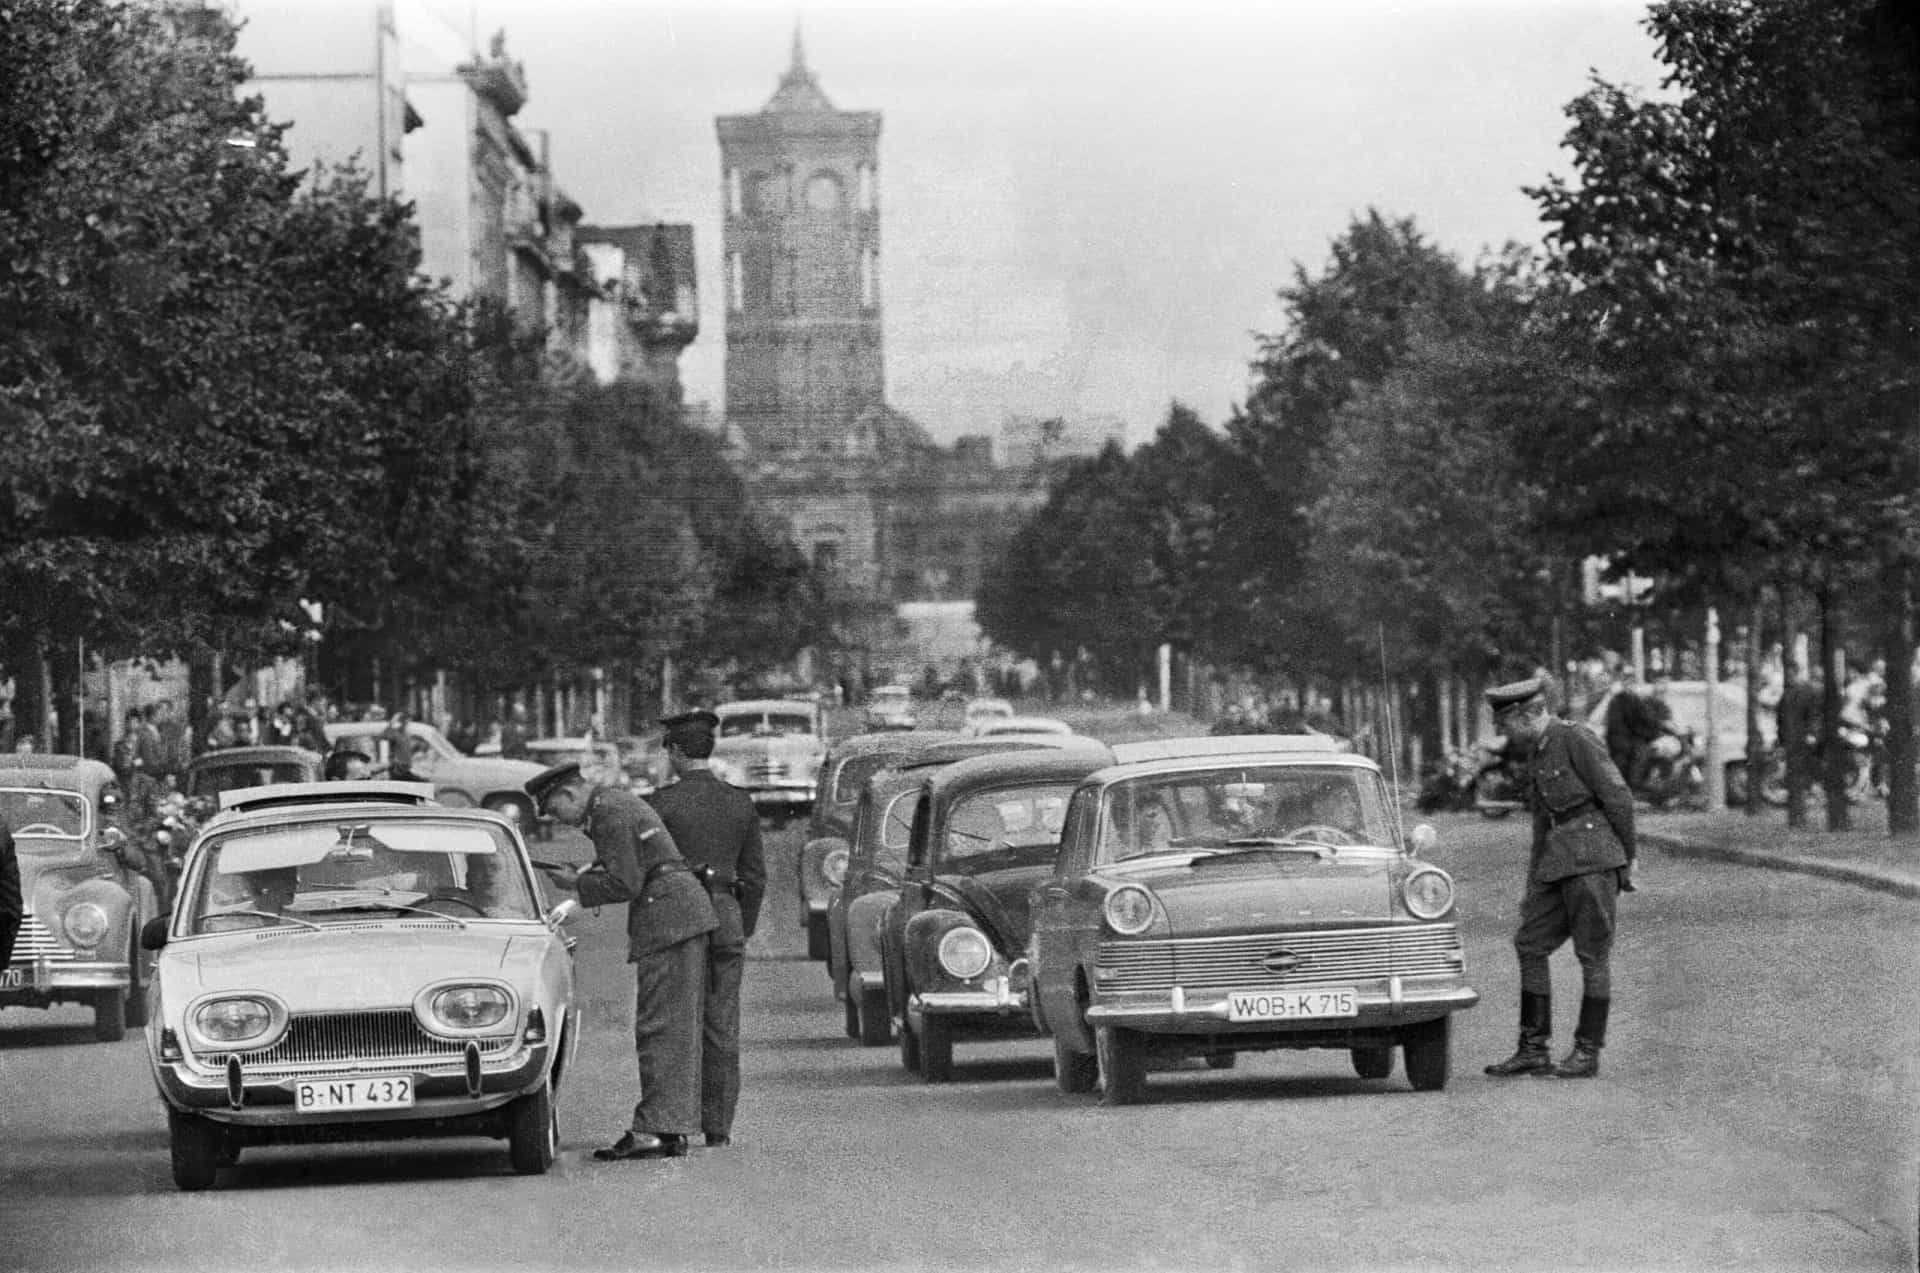 <p>Pictured: East German police checking drivers' documentation on the streets of Berlin early August 1961 after the East-West border was closed in preparation for the wall's construction.</p><p><a href="https://www.msn.com/en-us/community/channel/vid-7xx8mnucu55yw63we9va2gwr7uihbxwc68fxqp25x6tg4ftibpra?cvid=94631541bc0f4f89bfd59158d696ad7e">Follow us and access great exclusive content everyday</a></p>